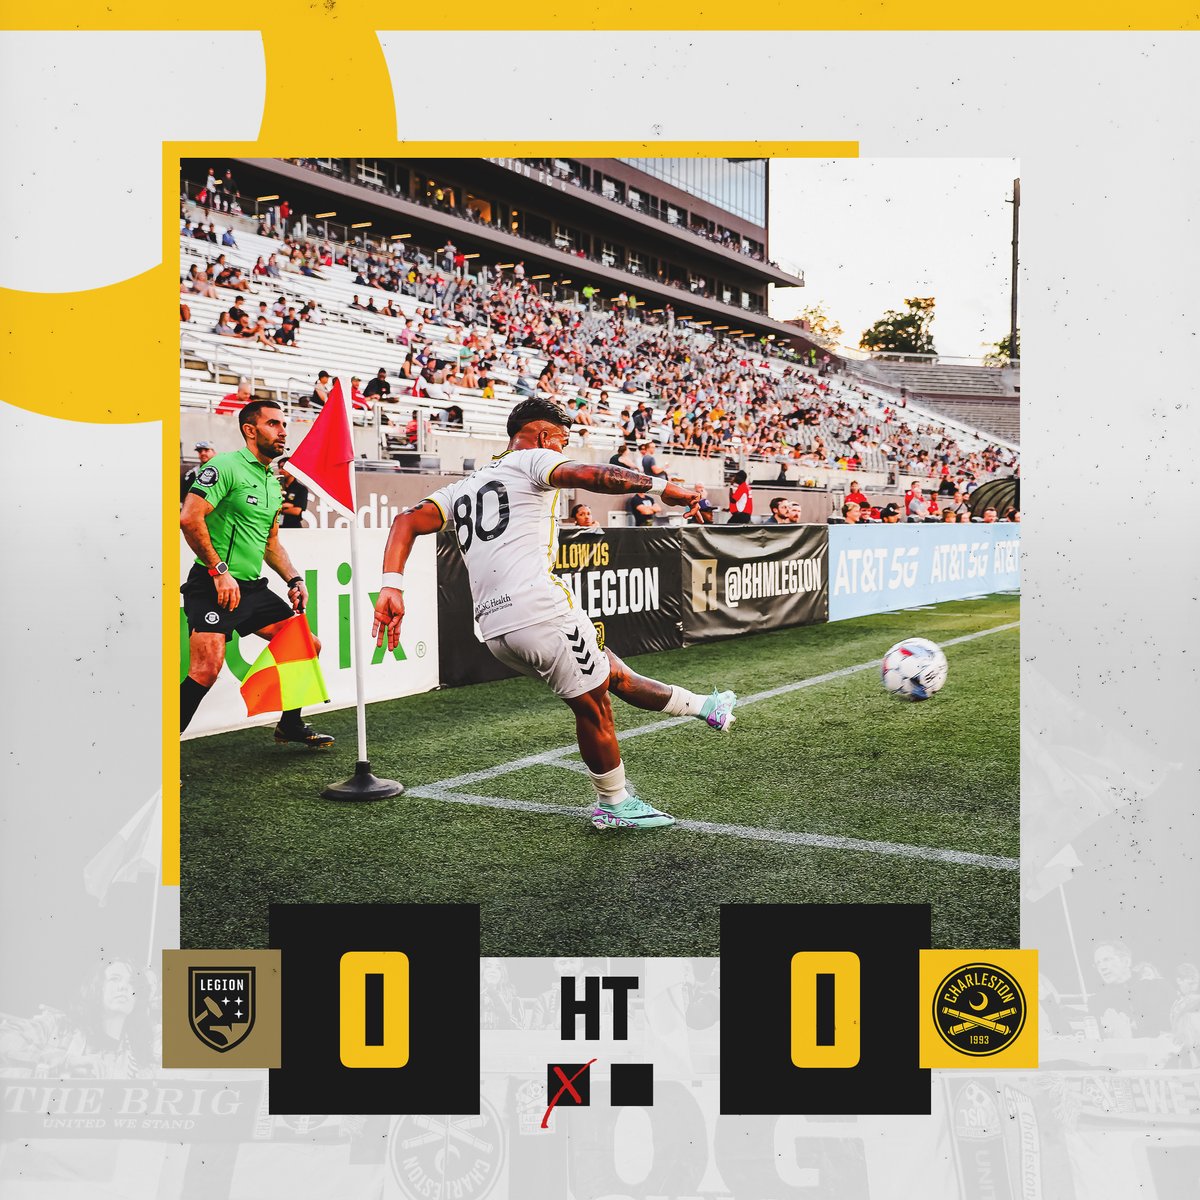 HT | All square after the first 45 minutes.

#BHMvCHS | #CB93 #FortifyAndConquer